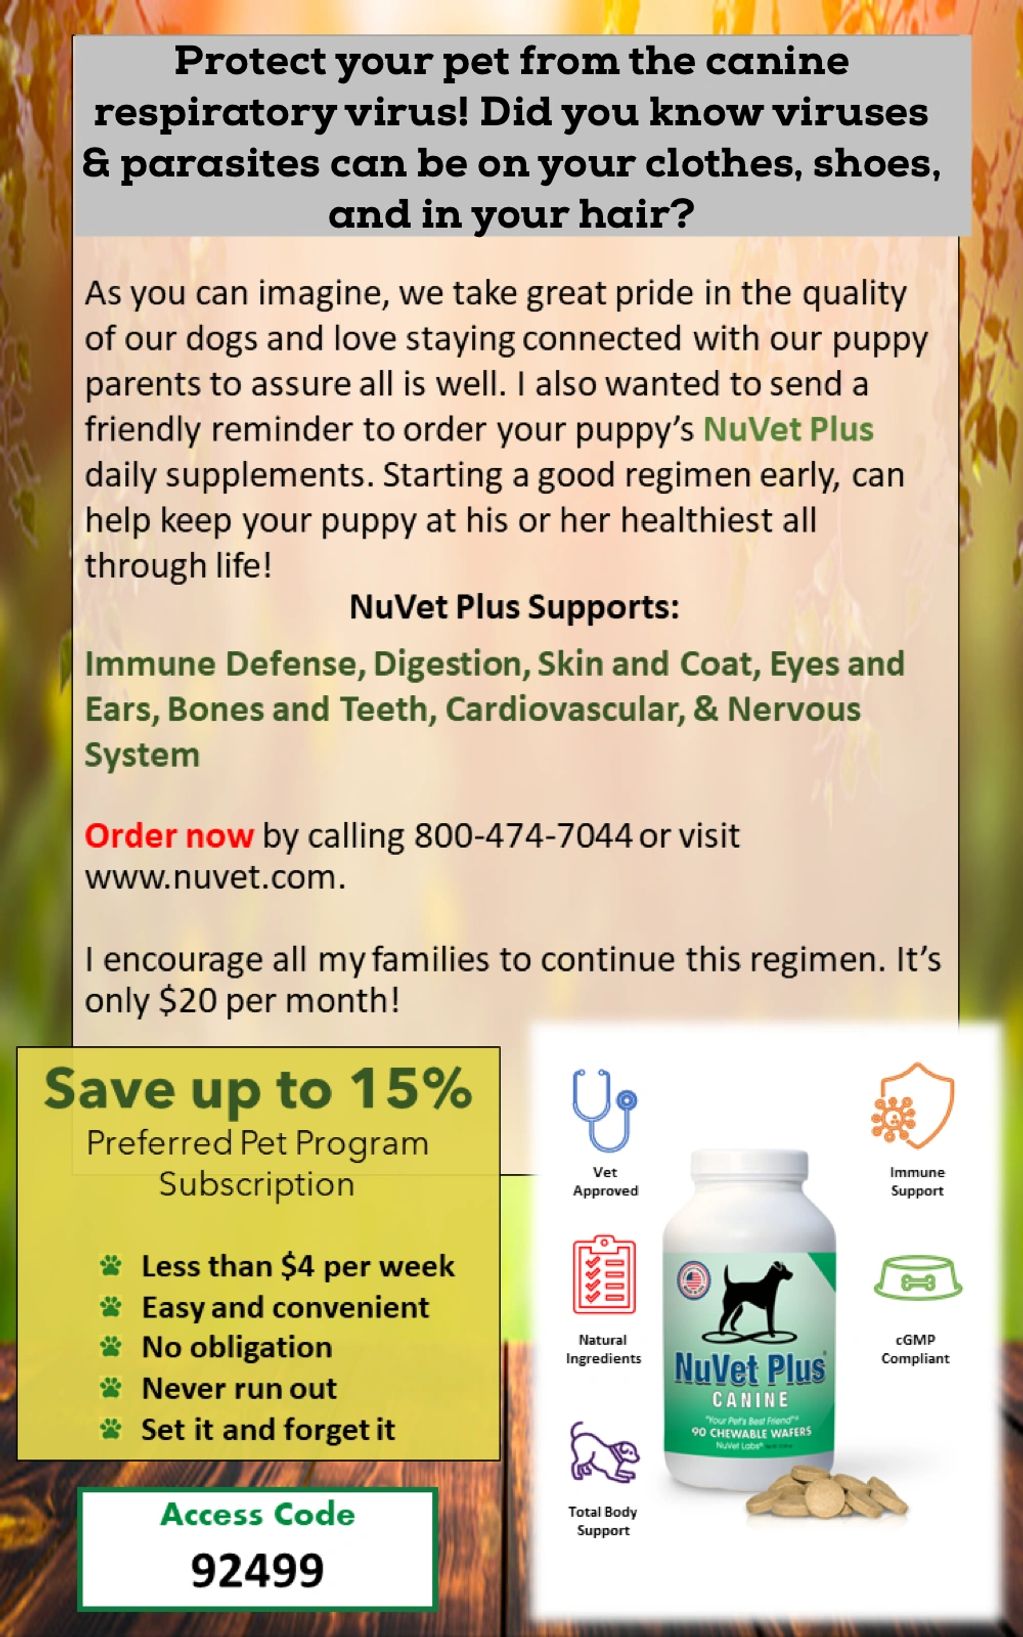 NuVet Plus canine wafers wellness dog puppy health immune system all natural NuVet protect virus